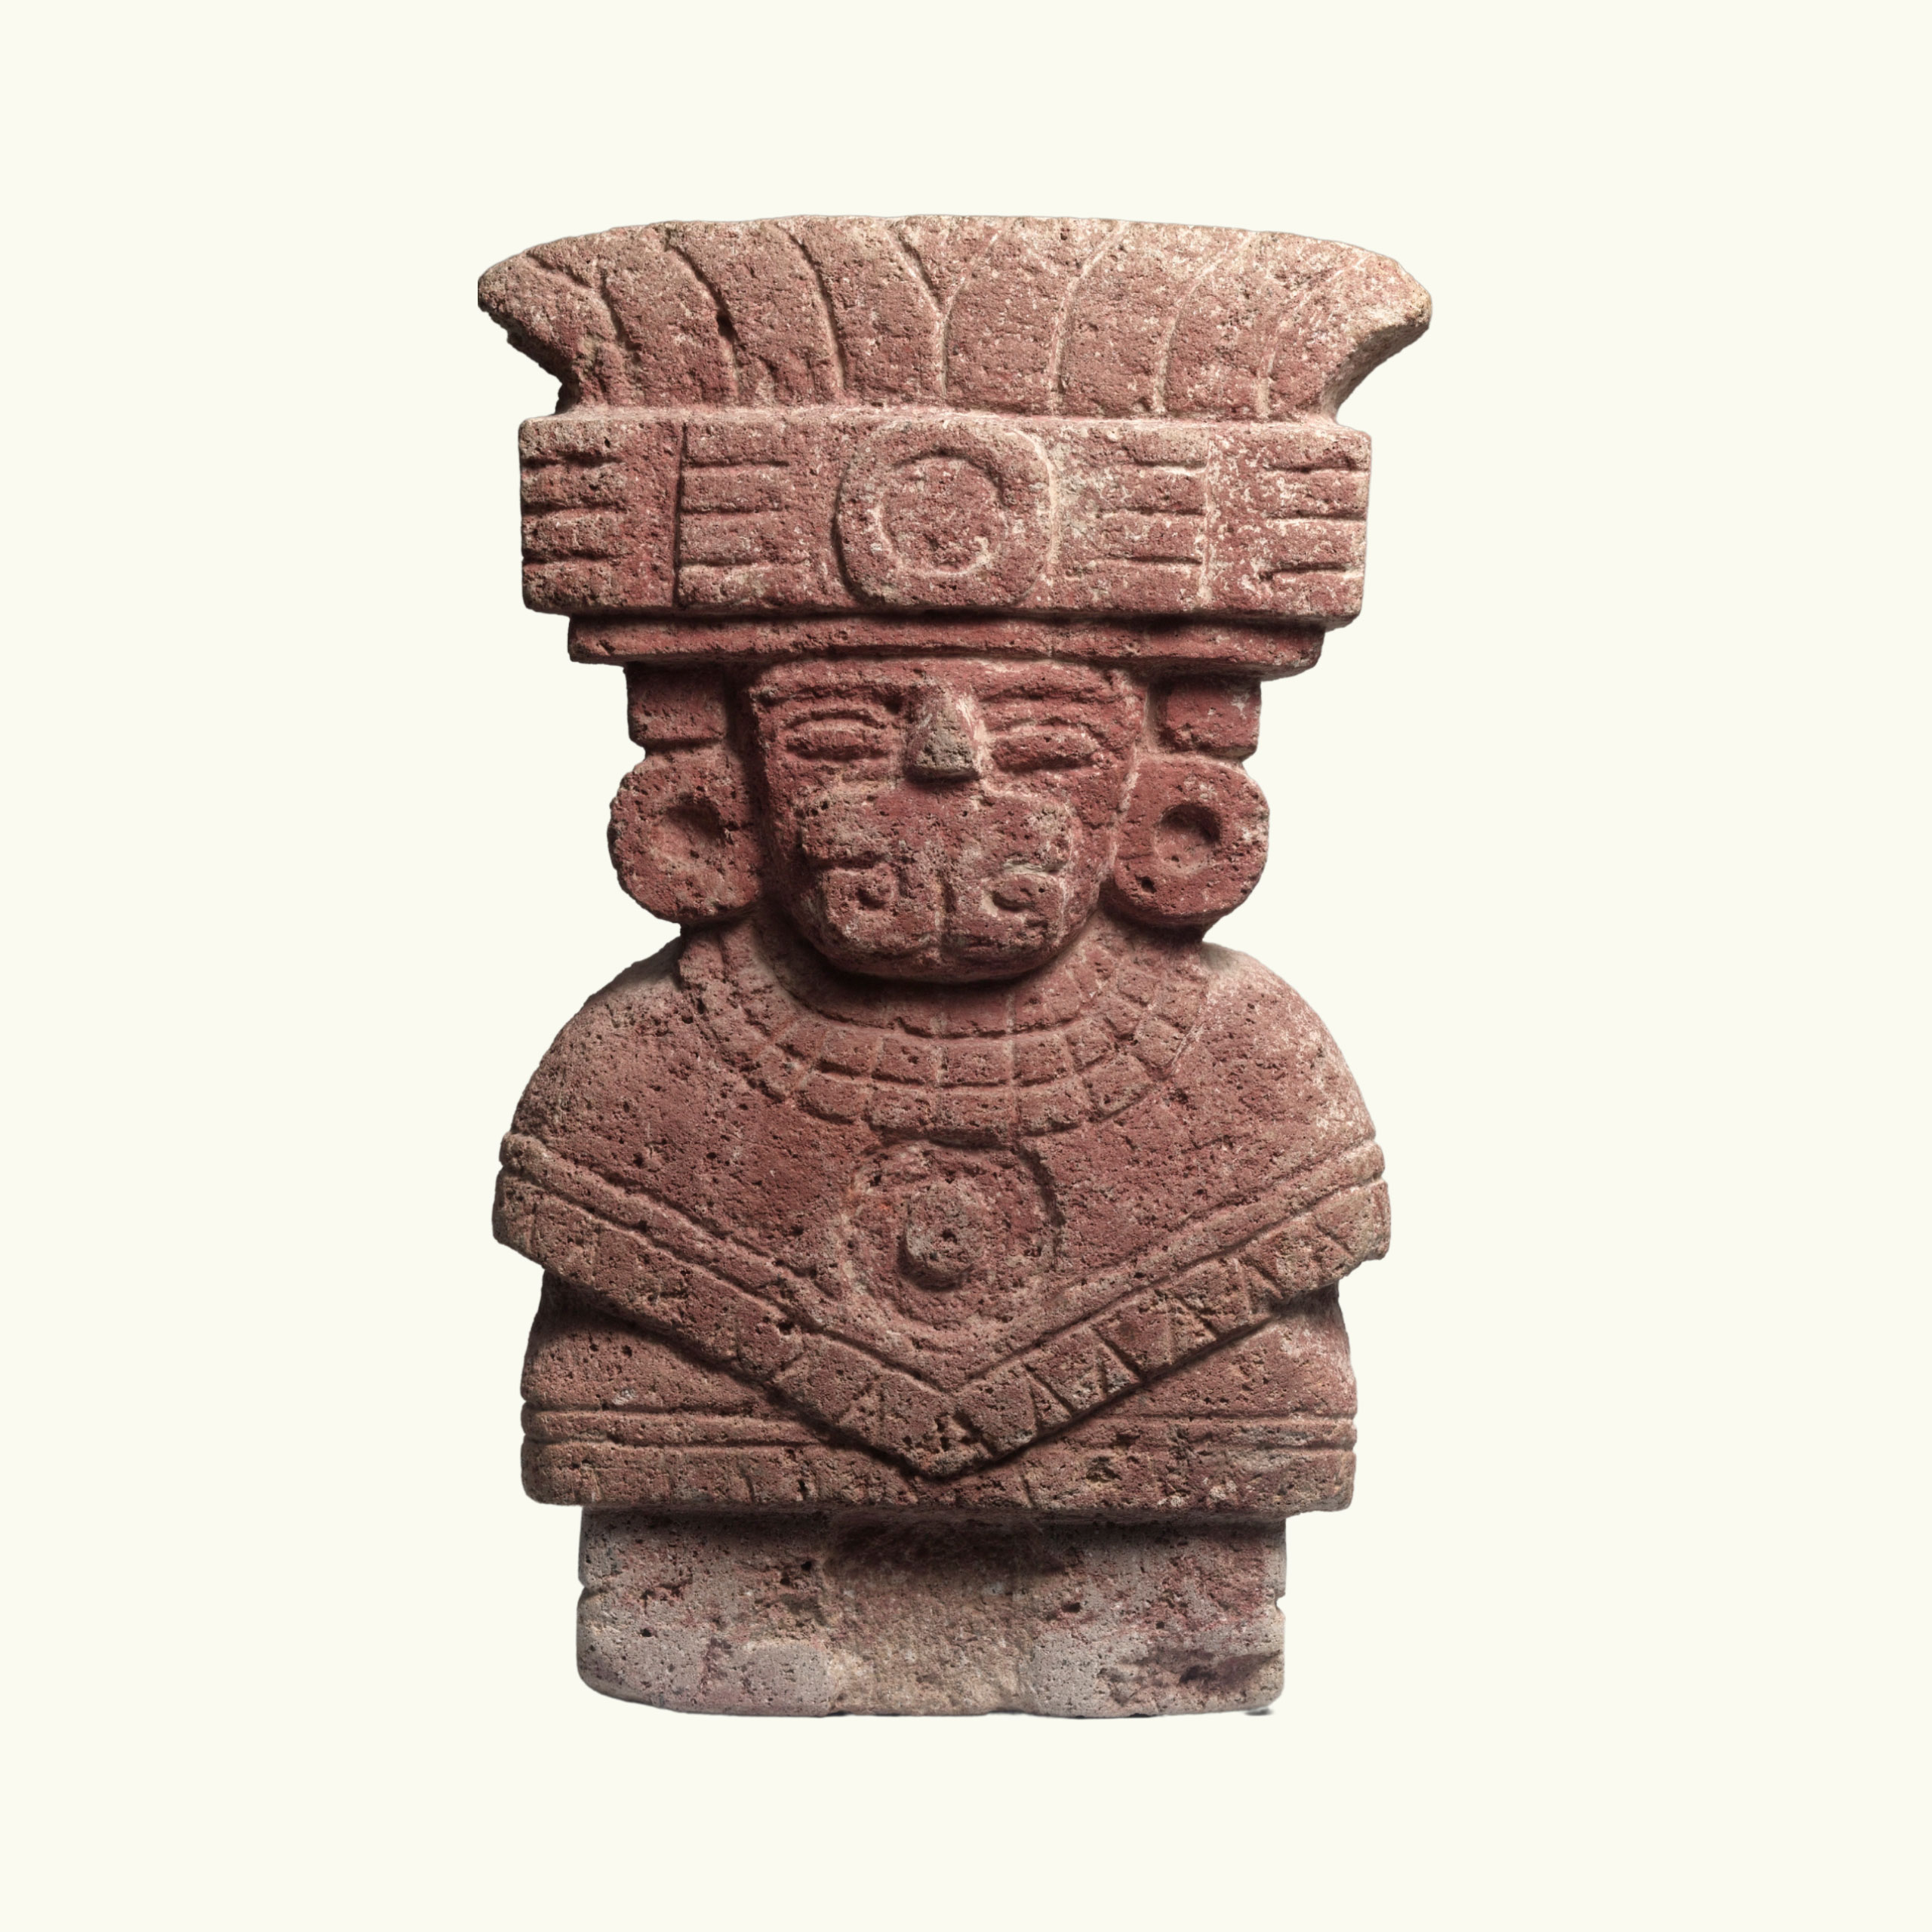 A seated goddess with a headdress made of volcanic stone and painted red.